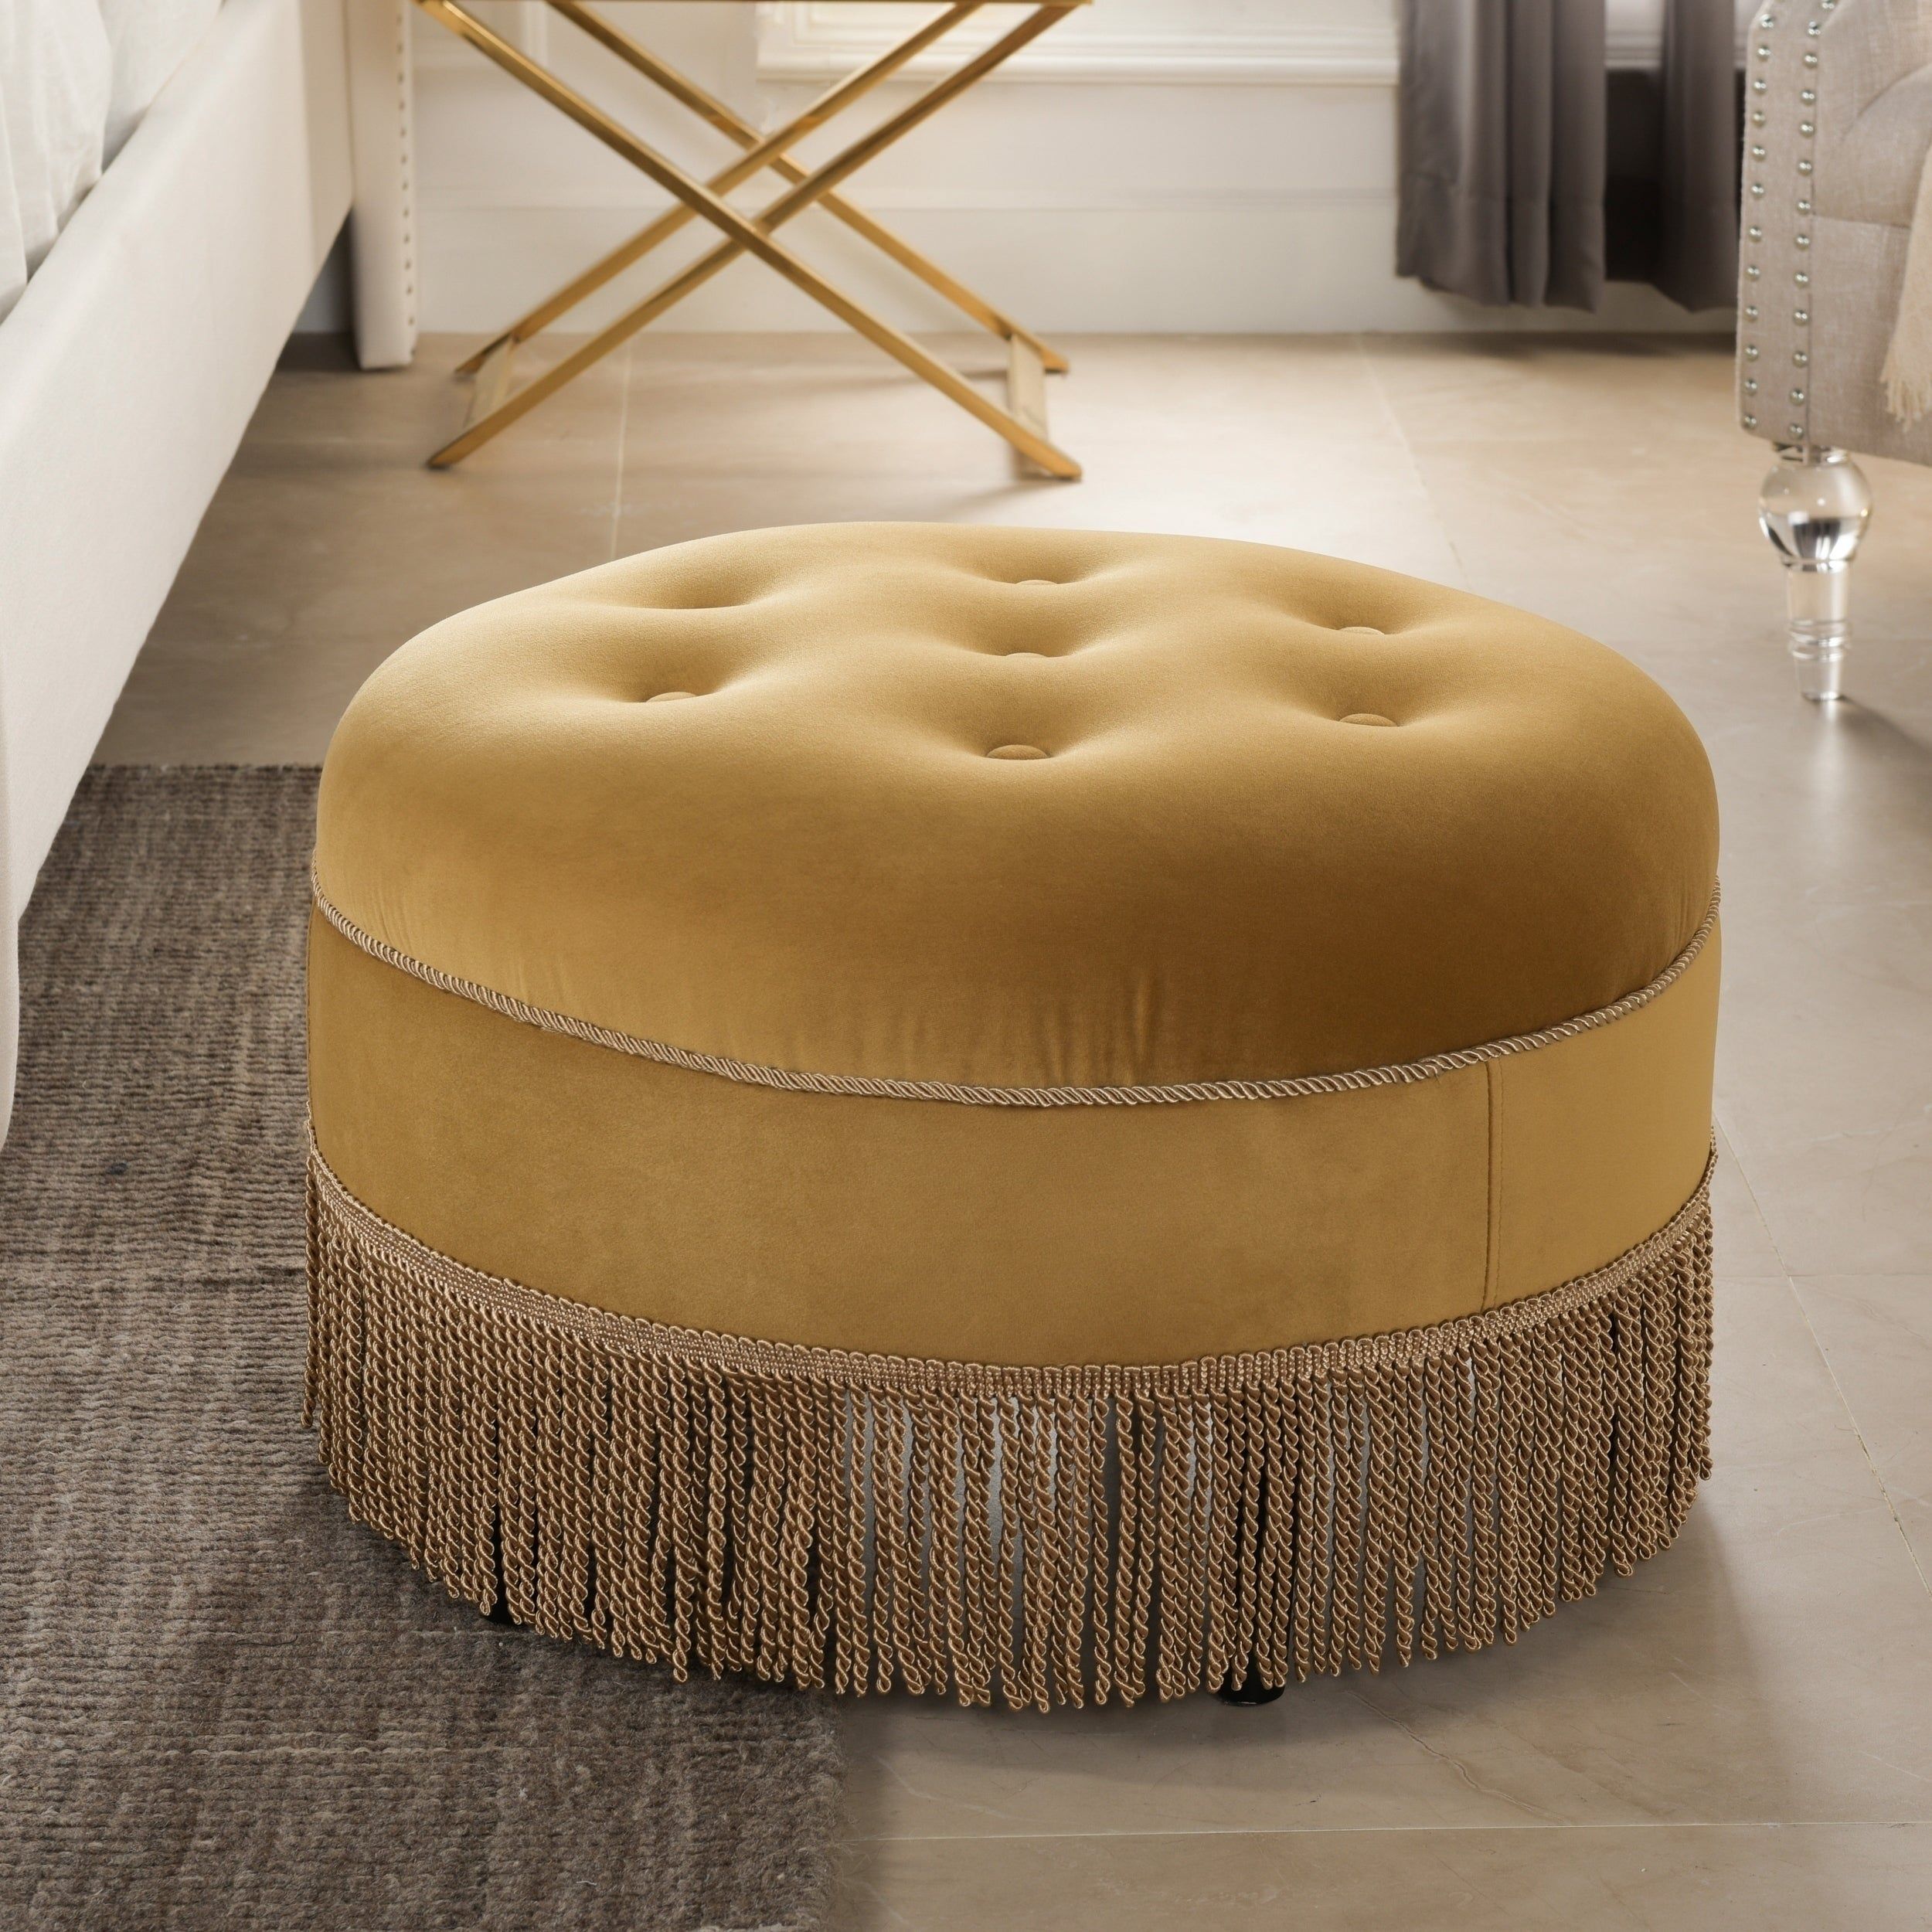 Yolanda Tufted Velvet Decorative Round Footstool Ottomansmall | Ebay With Brown Tufted Pouf Ottomans (View 9 of 20)